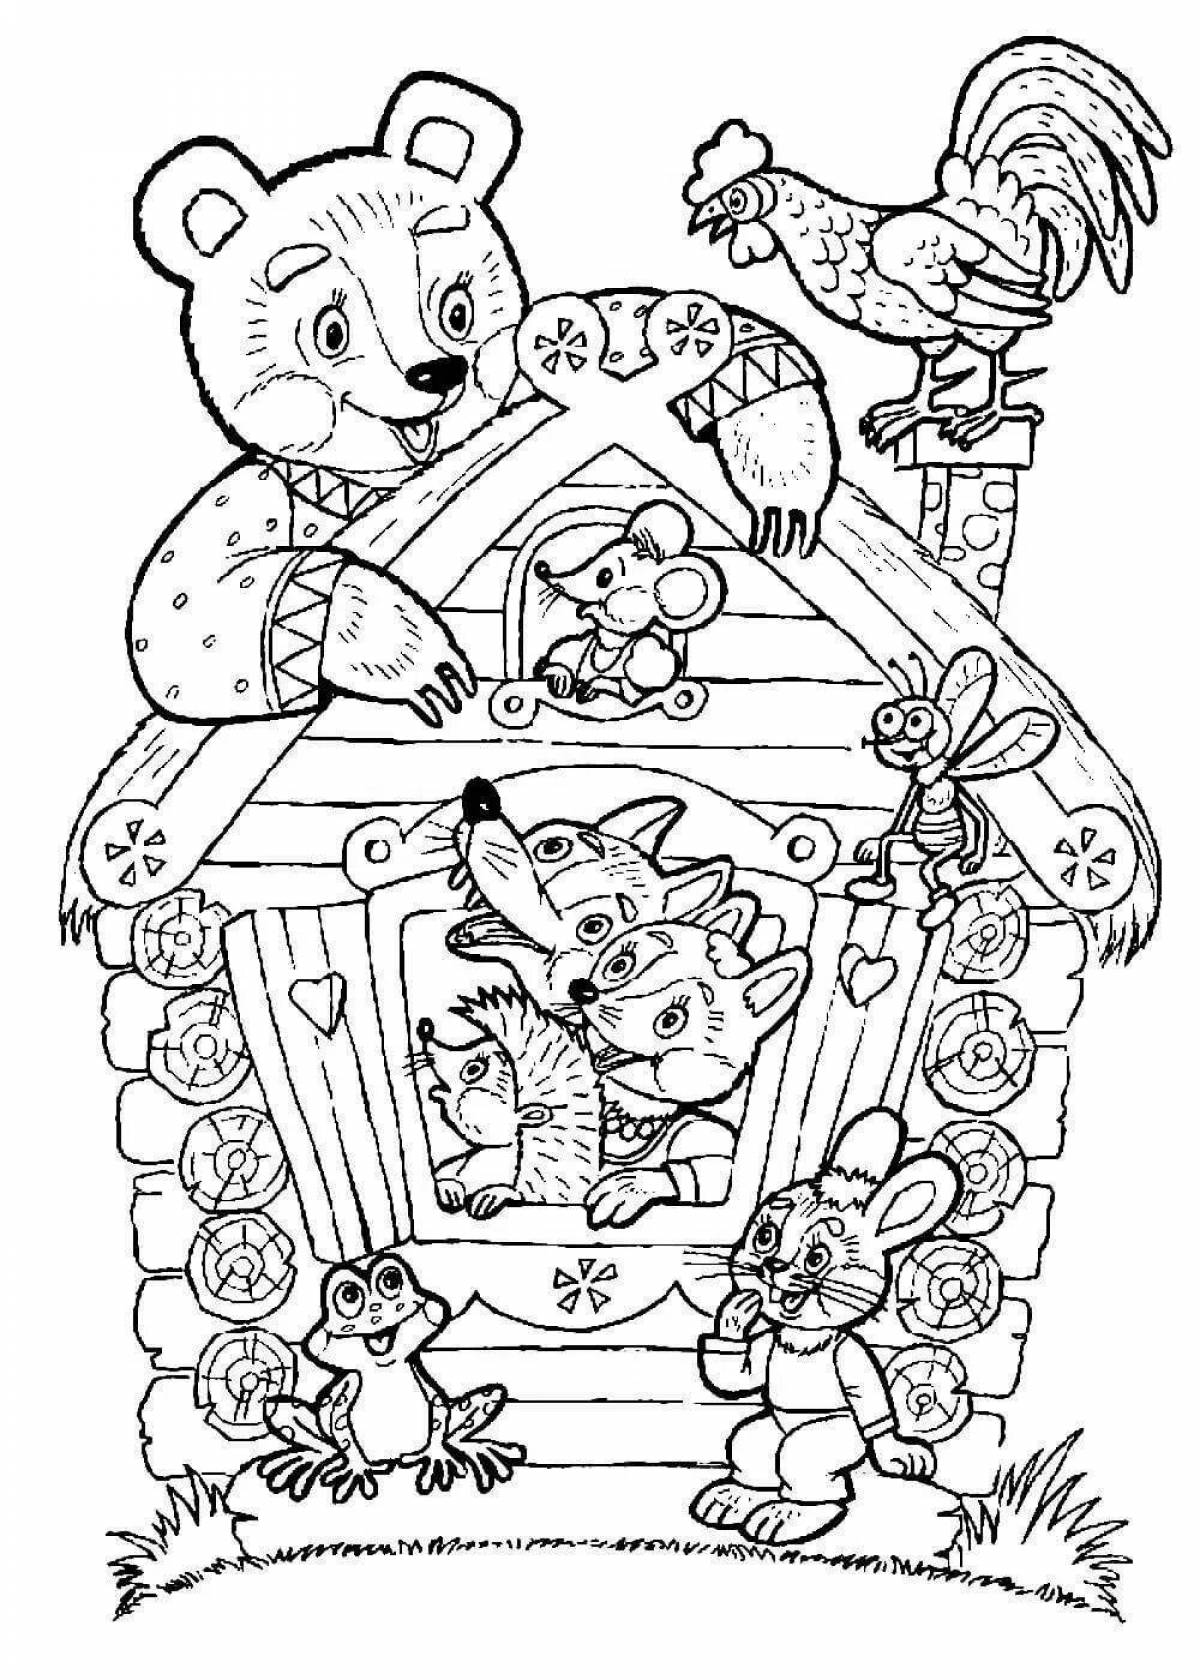 Radiant coloring book heroes of fairy tales